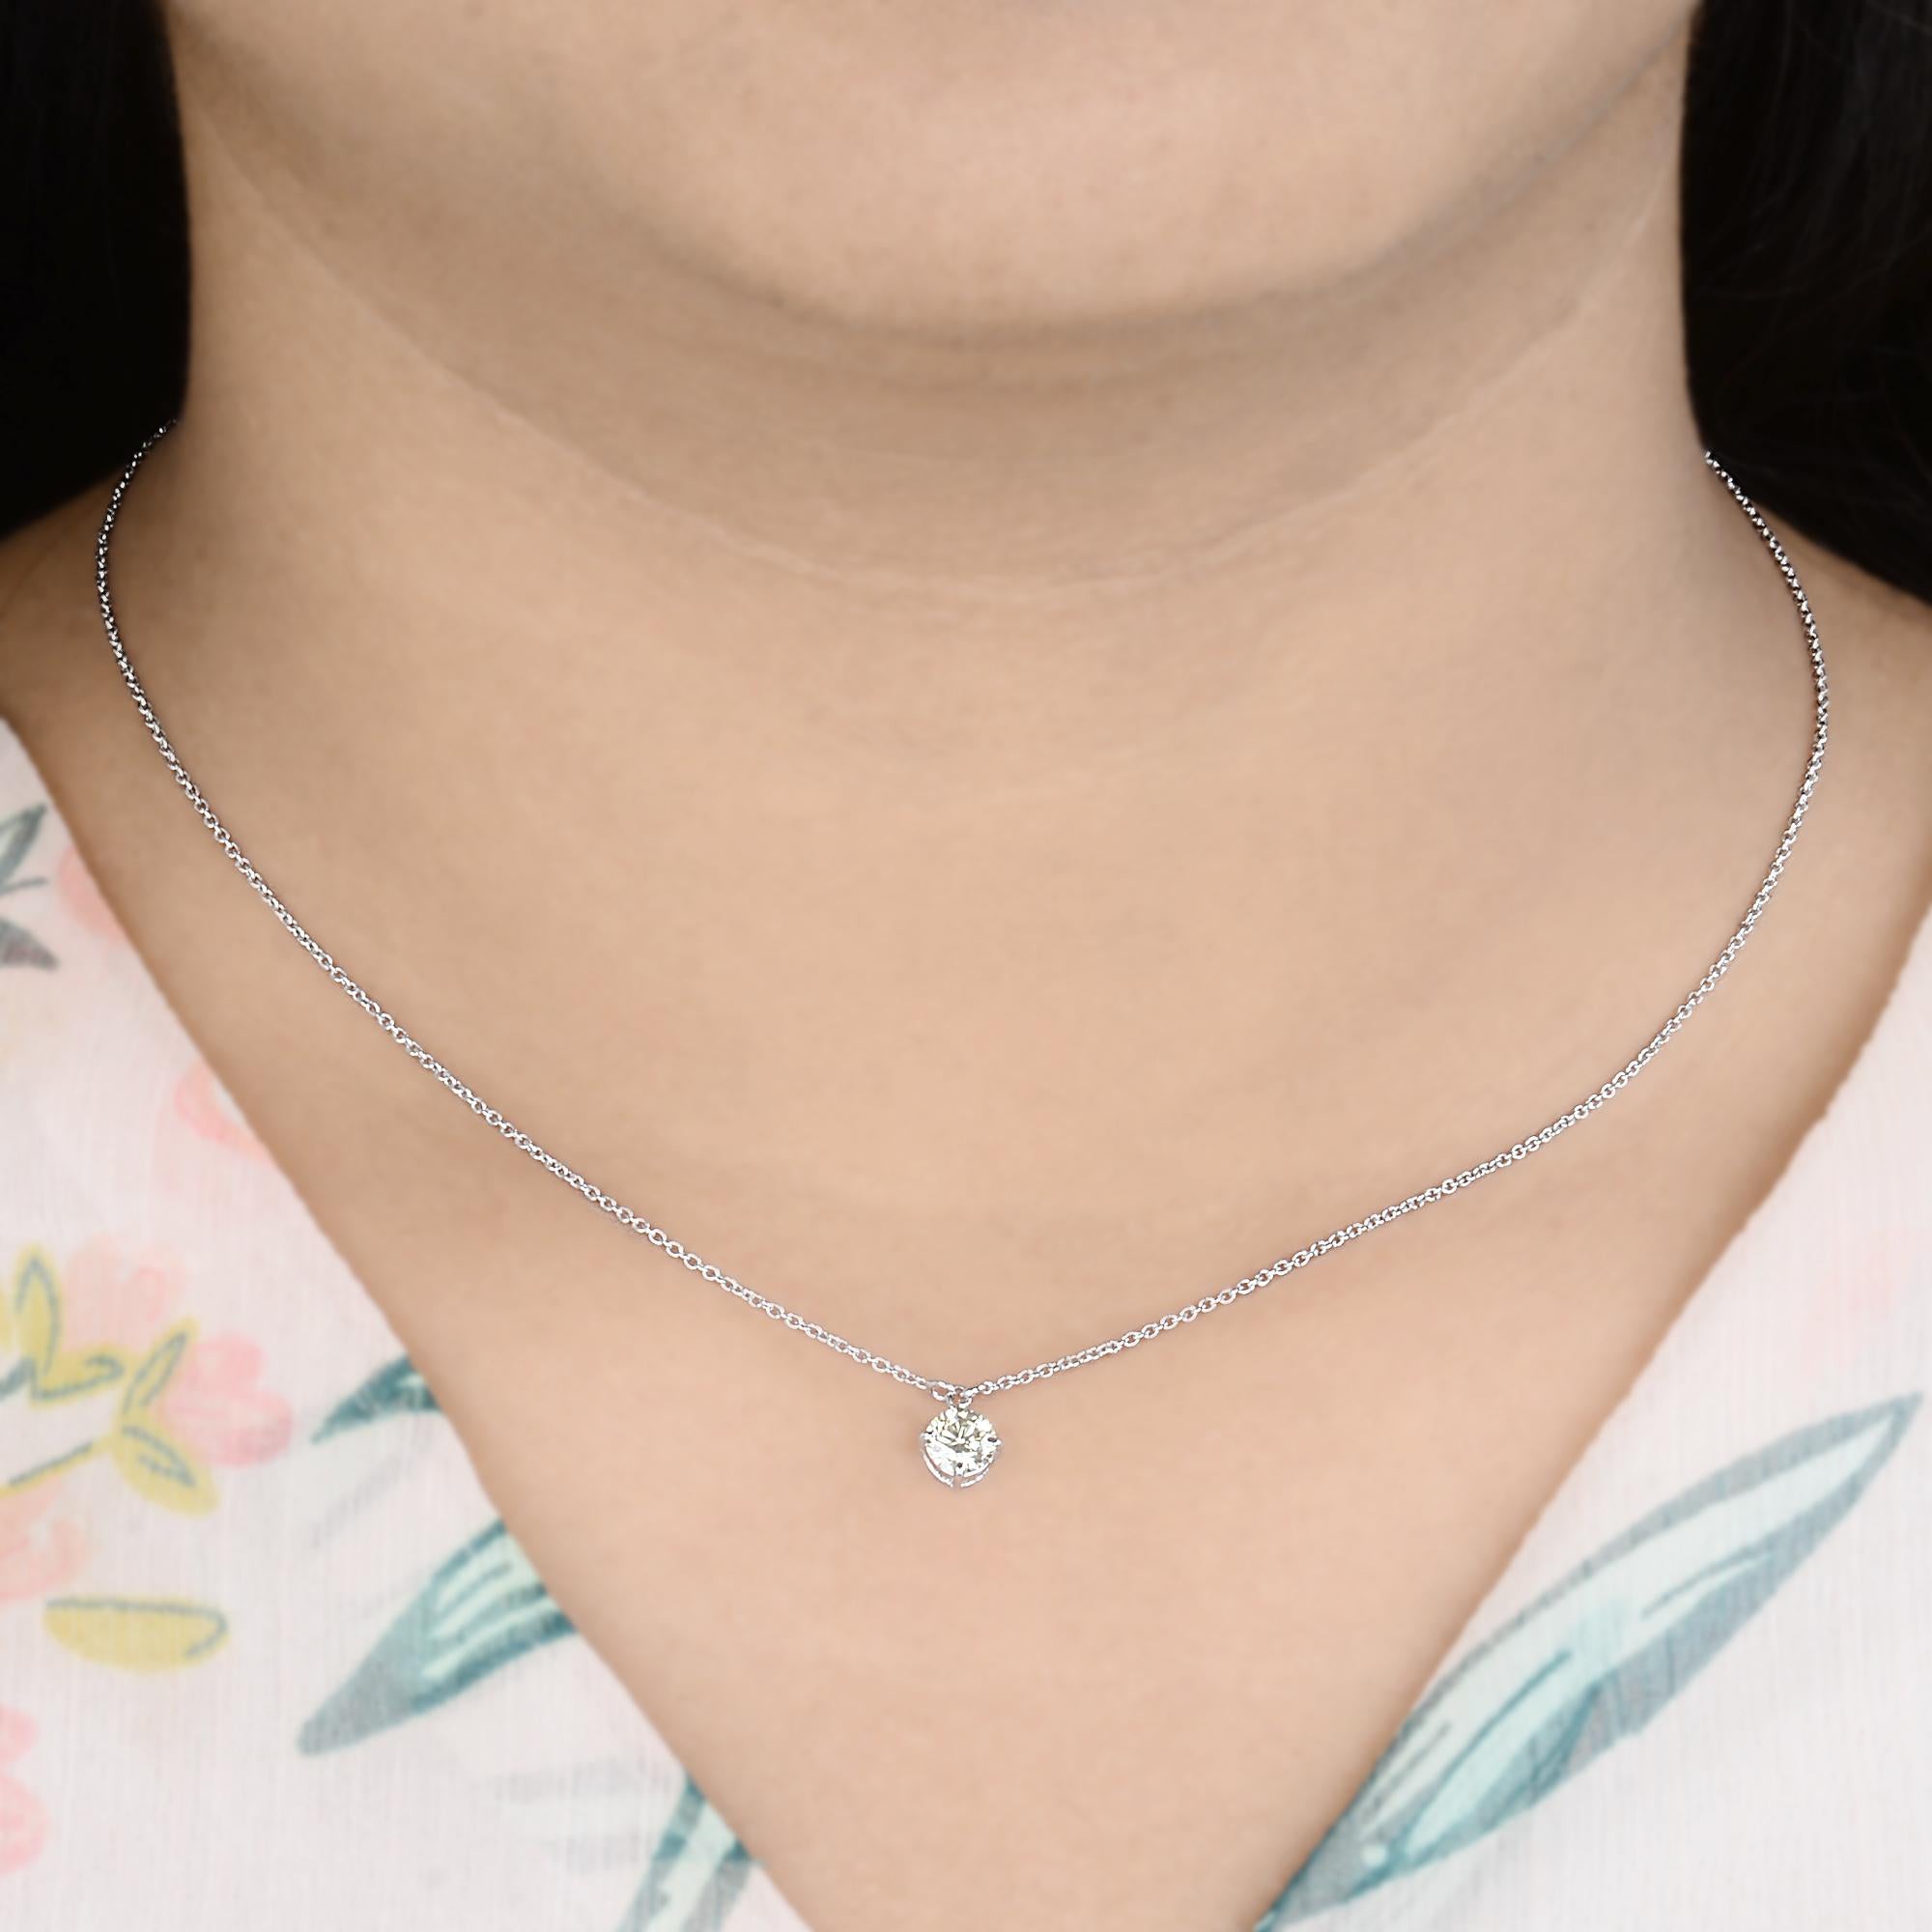 Adorn yourself with timeless elegance and understated beauty with this Solitaire Diamond Charm Pendant Necklace. Crafted in 10-karat white gold, this fine jewelry piece showcases a stunning solitaire diamond suspended from a delicate chain, creating